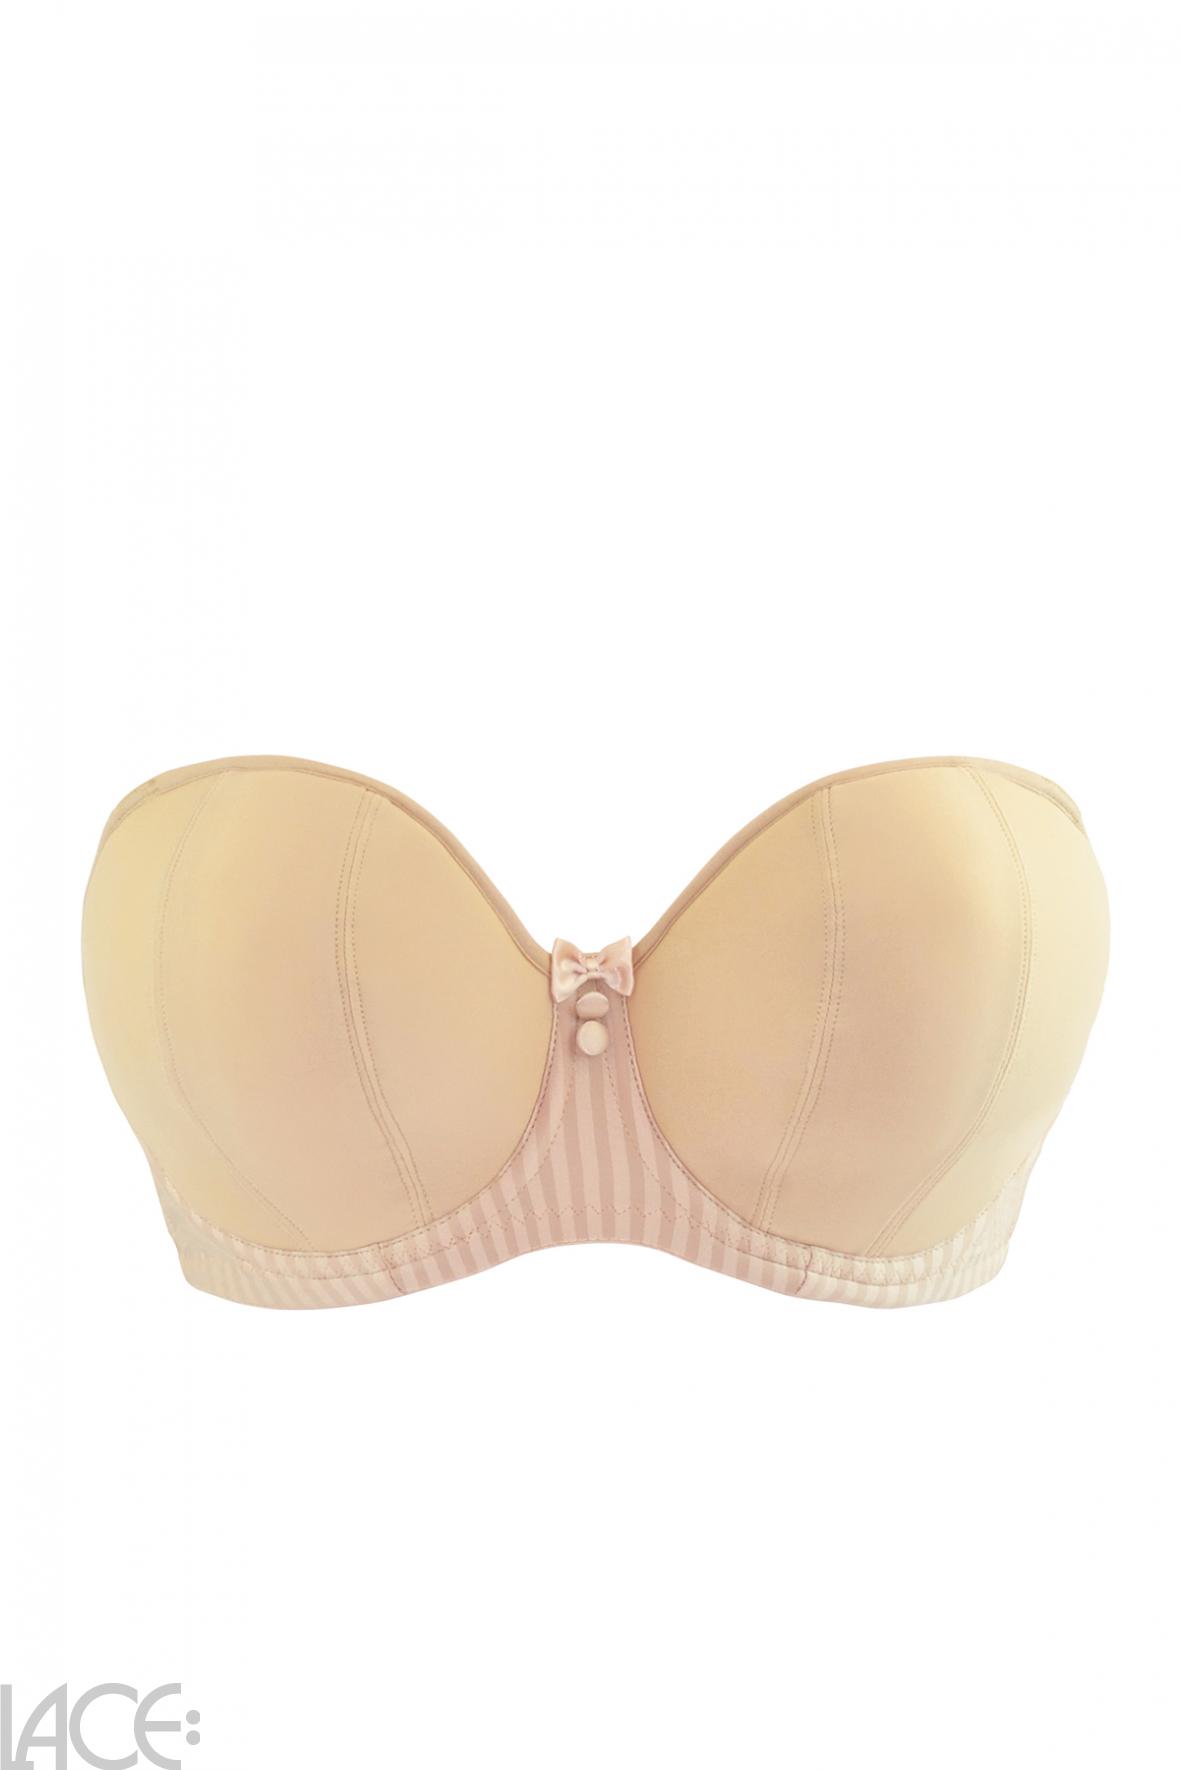 Curvy Kate Luxe Strapless bra F-J cup –